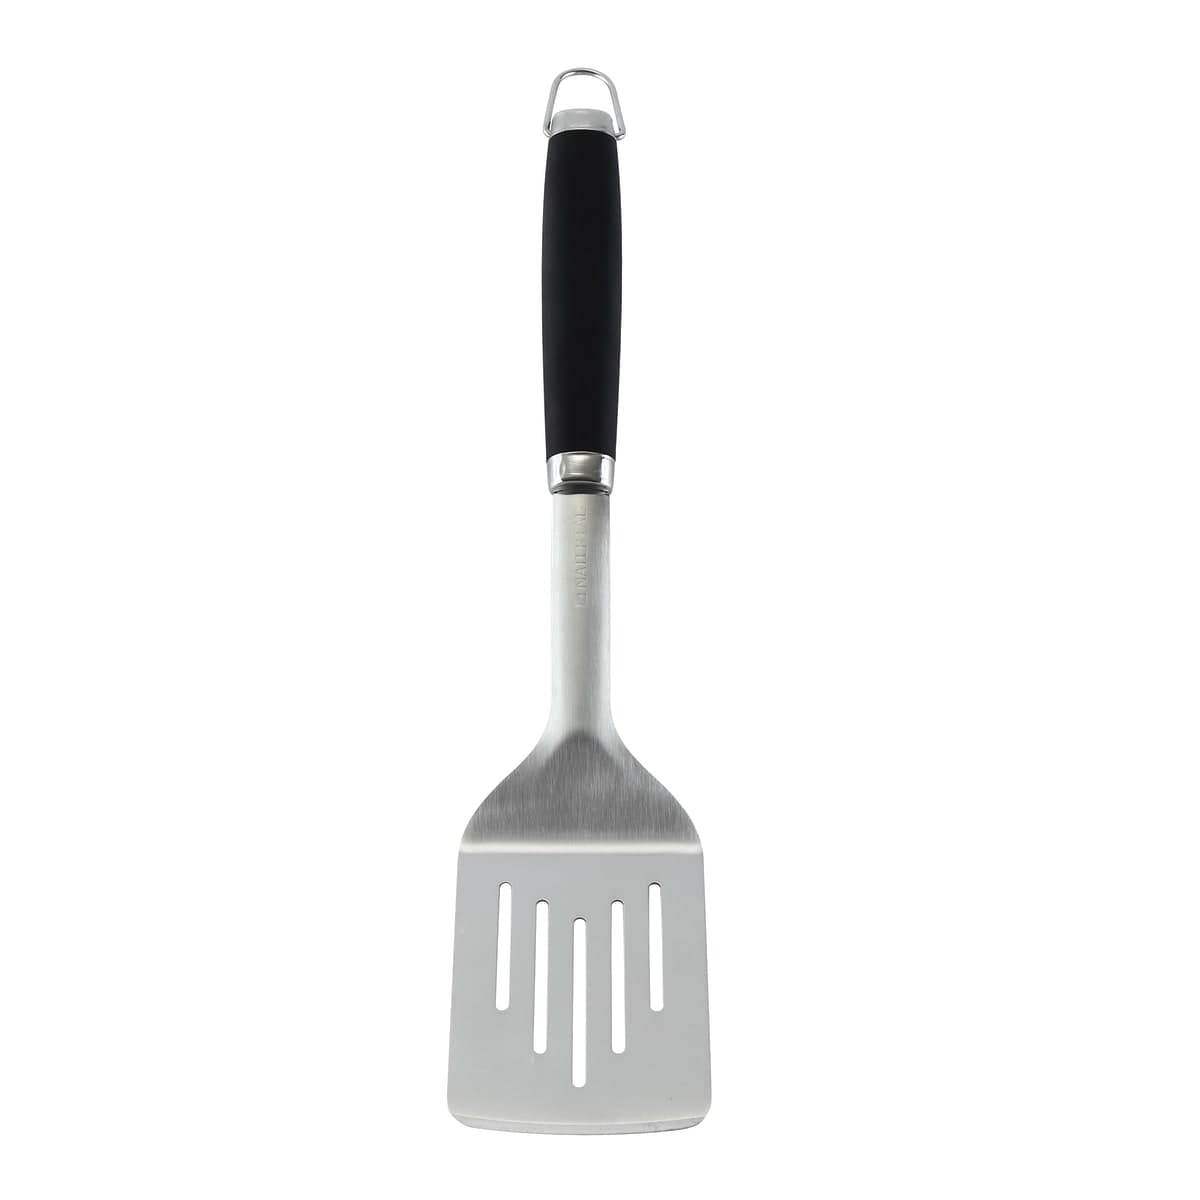 STAINLESS STEEL FOOD SPATULA - best price from Maltashopper.com BR500009591